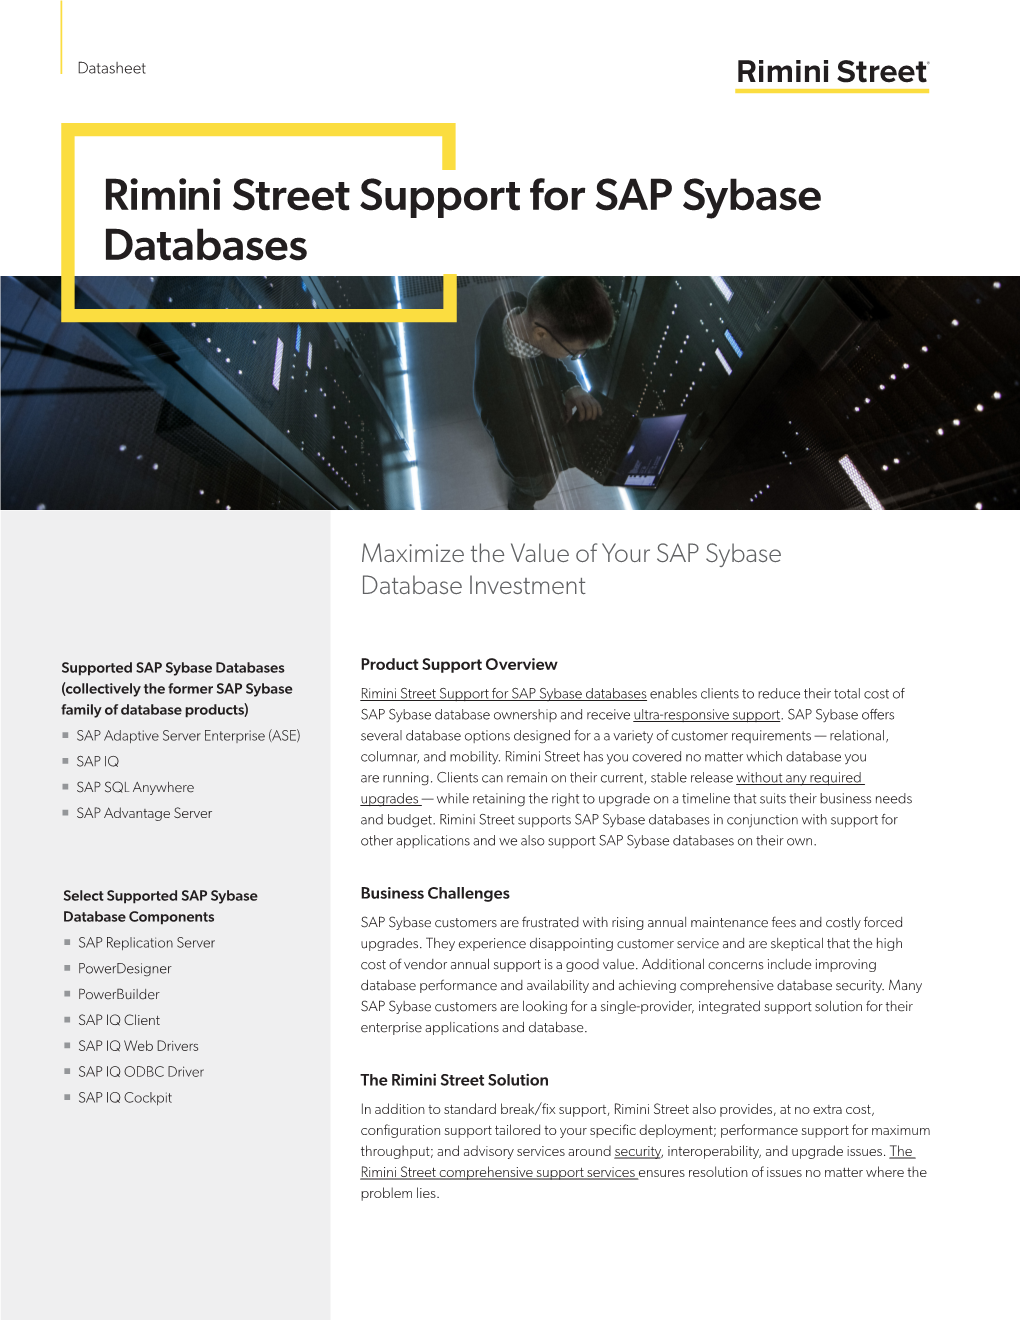 Third-Party Support for SAP Sybase Databases | Rimini Street